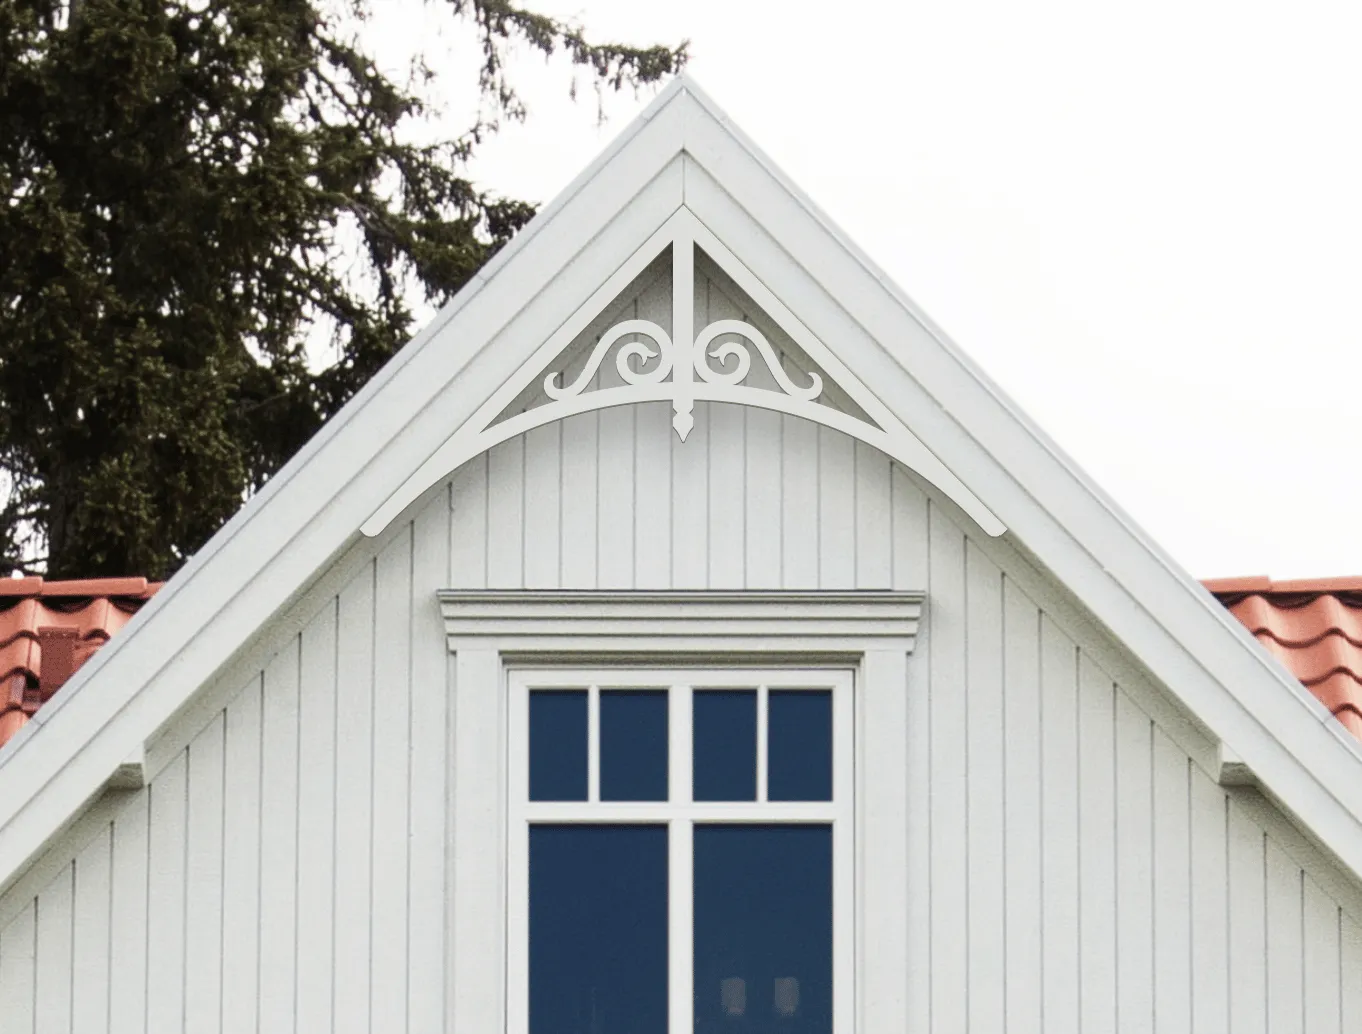 Gable pediment 005 - A white house with decorative wooden victorian millwork as house decoration for roof and gable end.